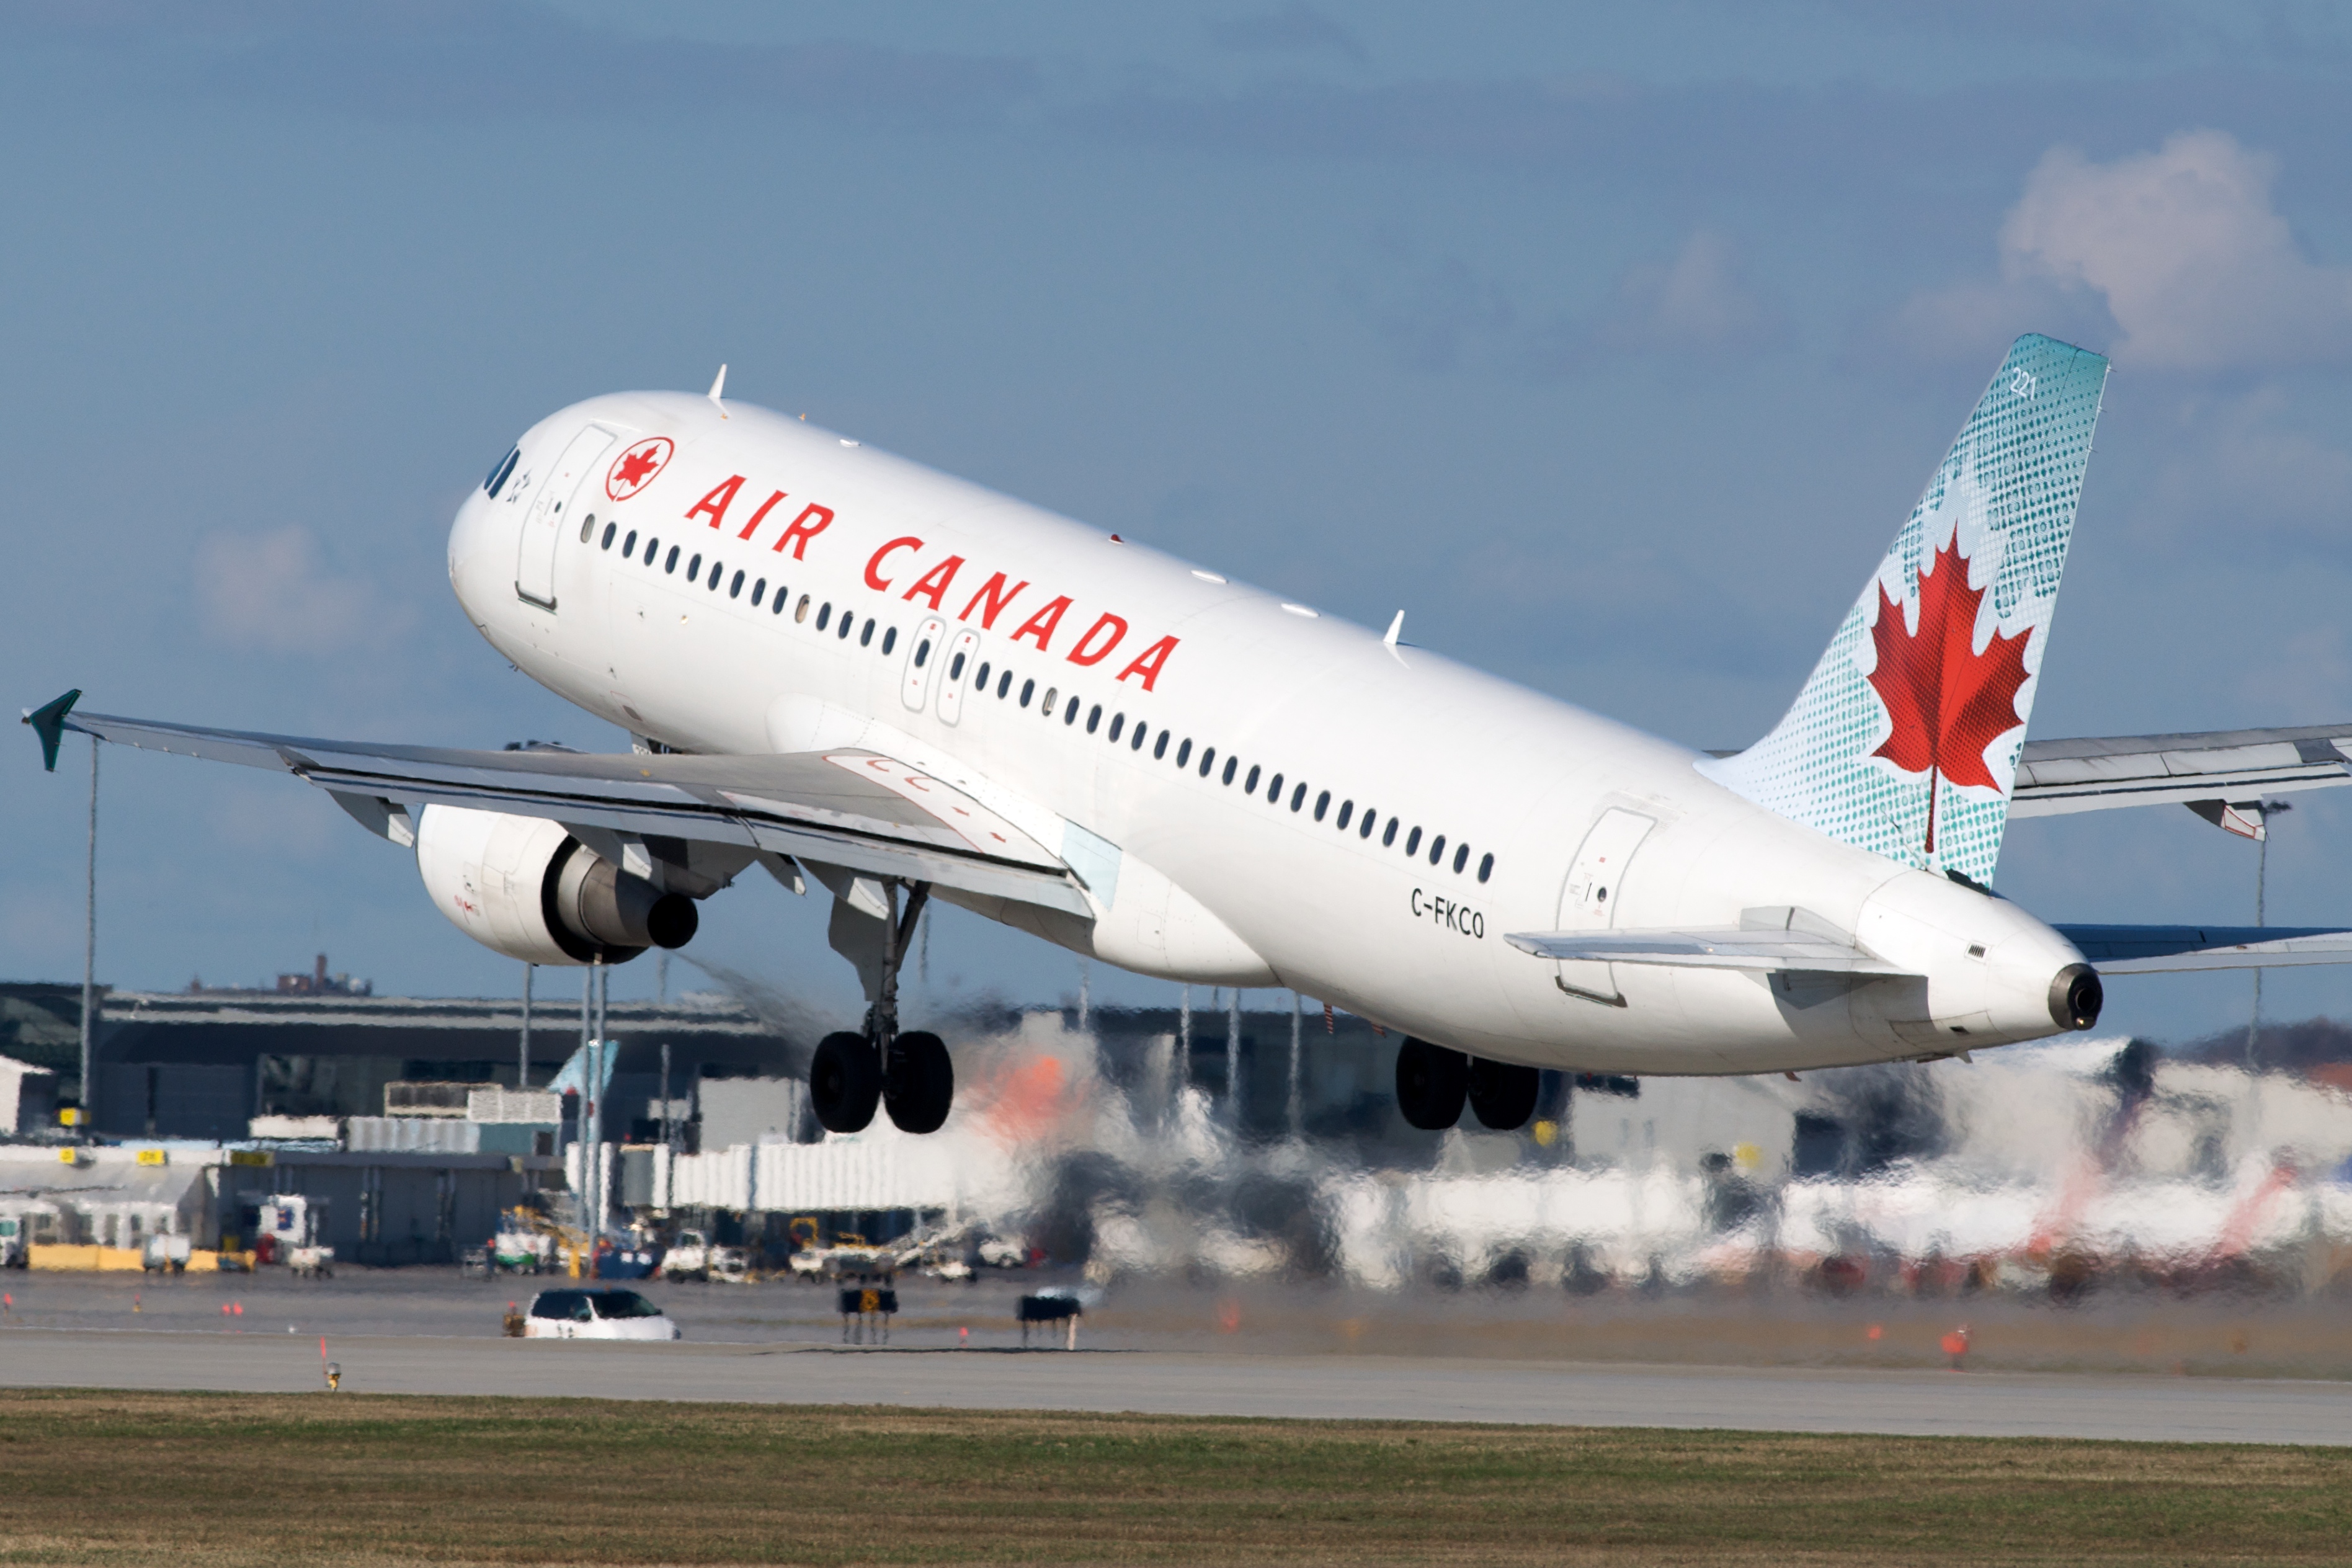 UPDATE 2-Air Canada flight diverted to Hawaii after turbulence, injuries reported